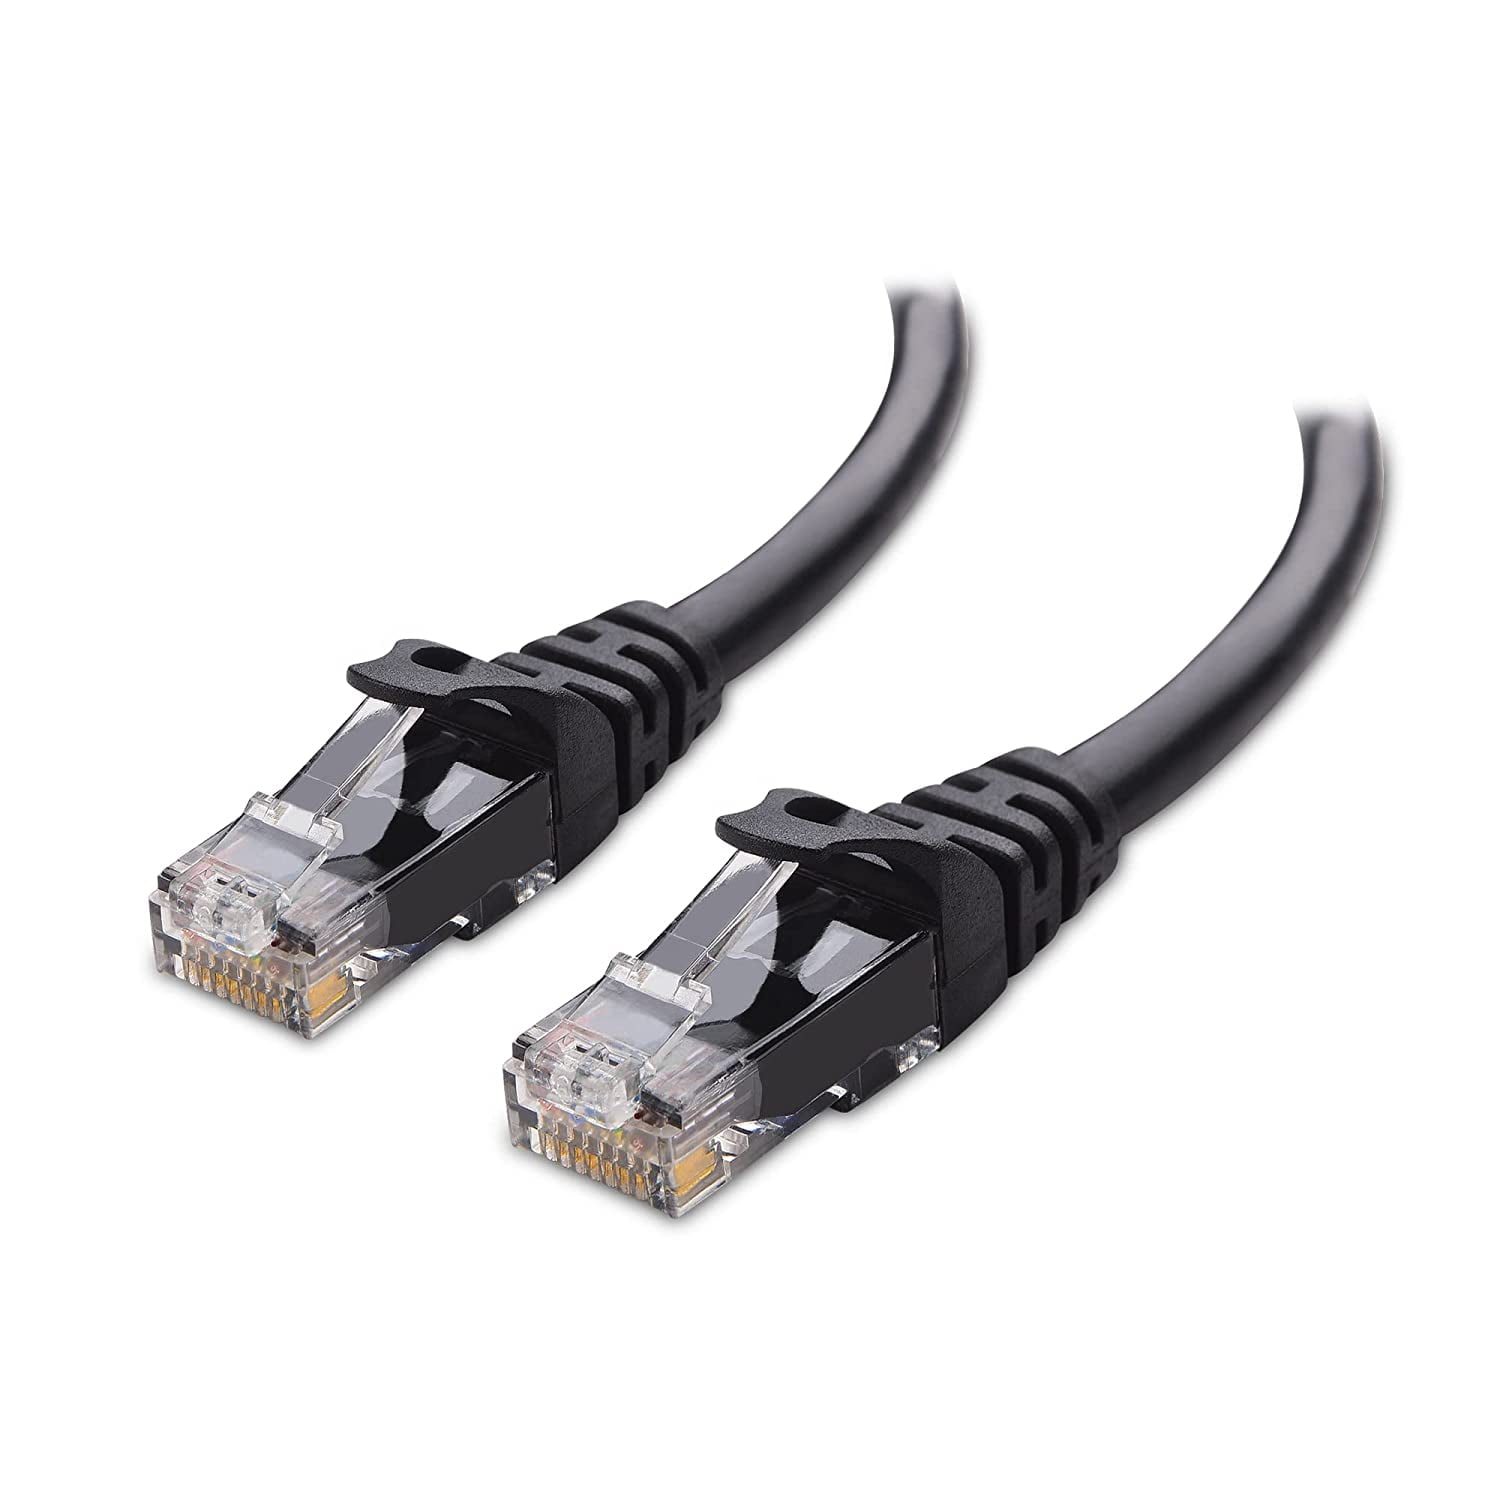 30 ft 9.1 Meters 30 Feet Patch cat 6 Ethernet LAN Wire UTP RJ45 Network Internet Cable Cat6 Ehternet Cable 